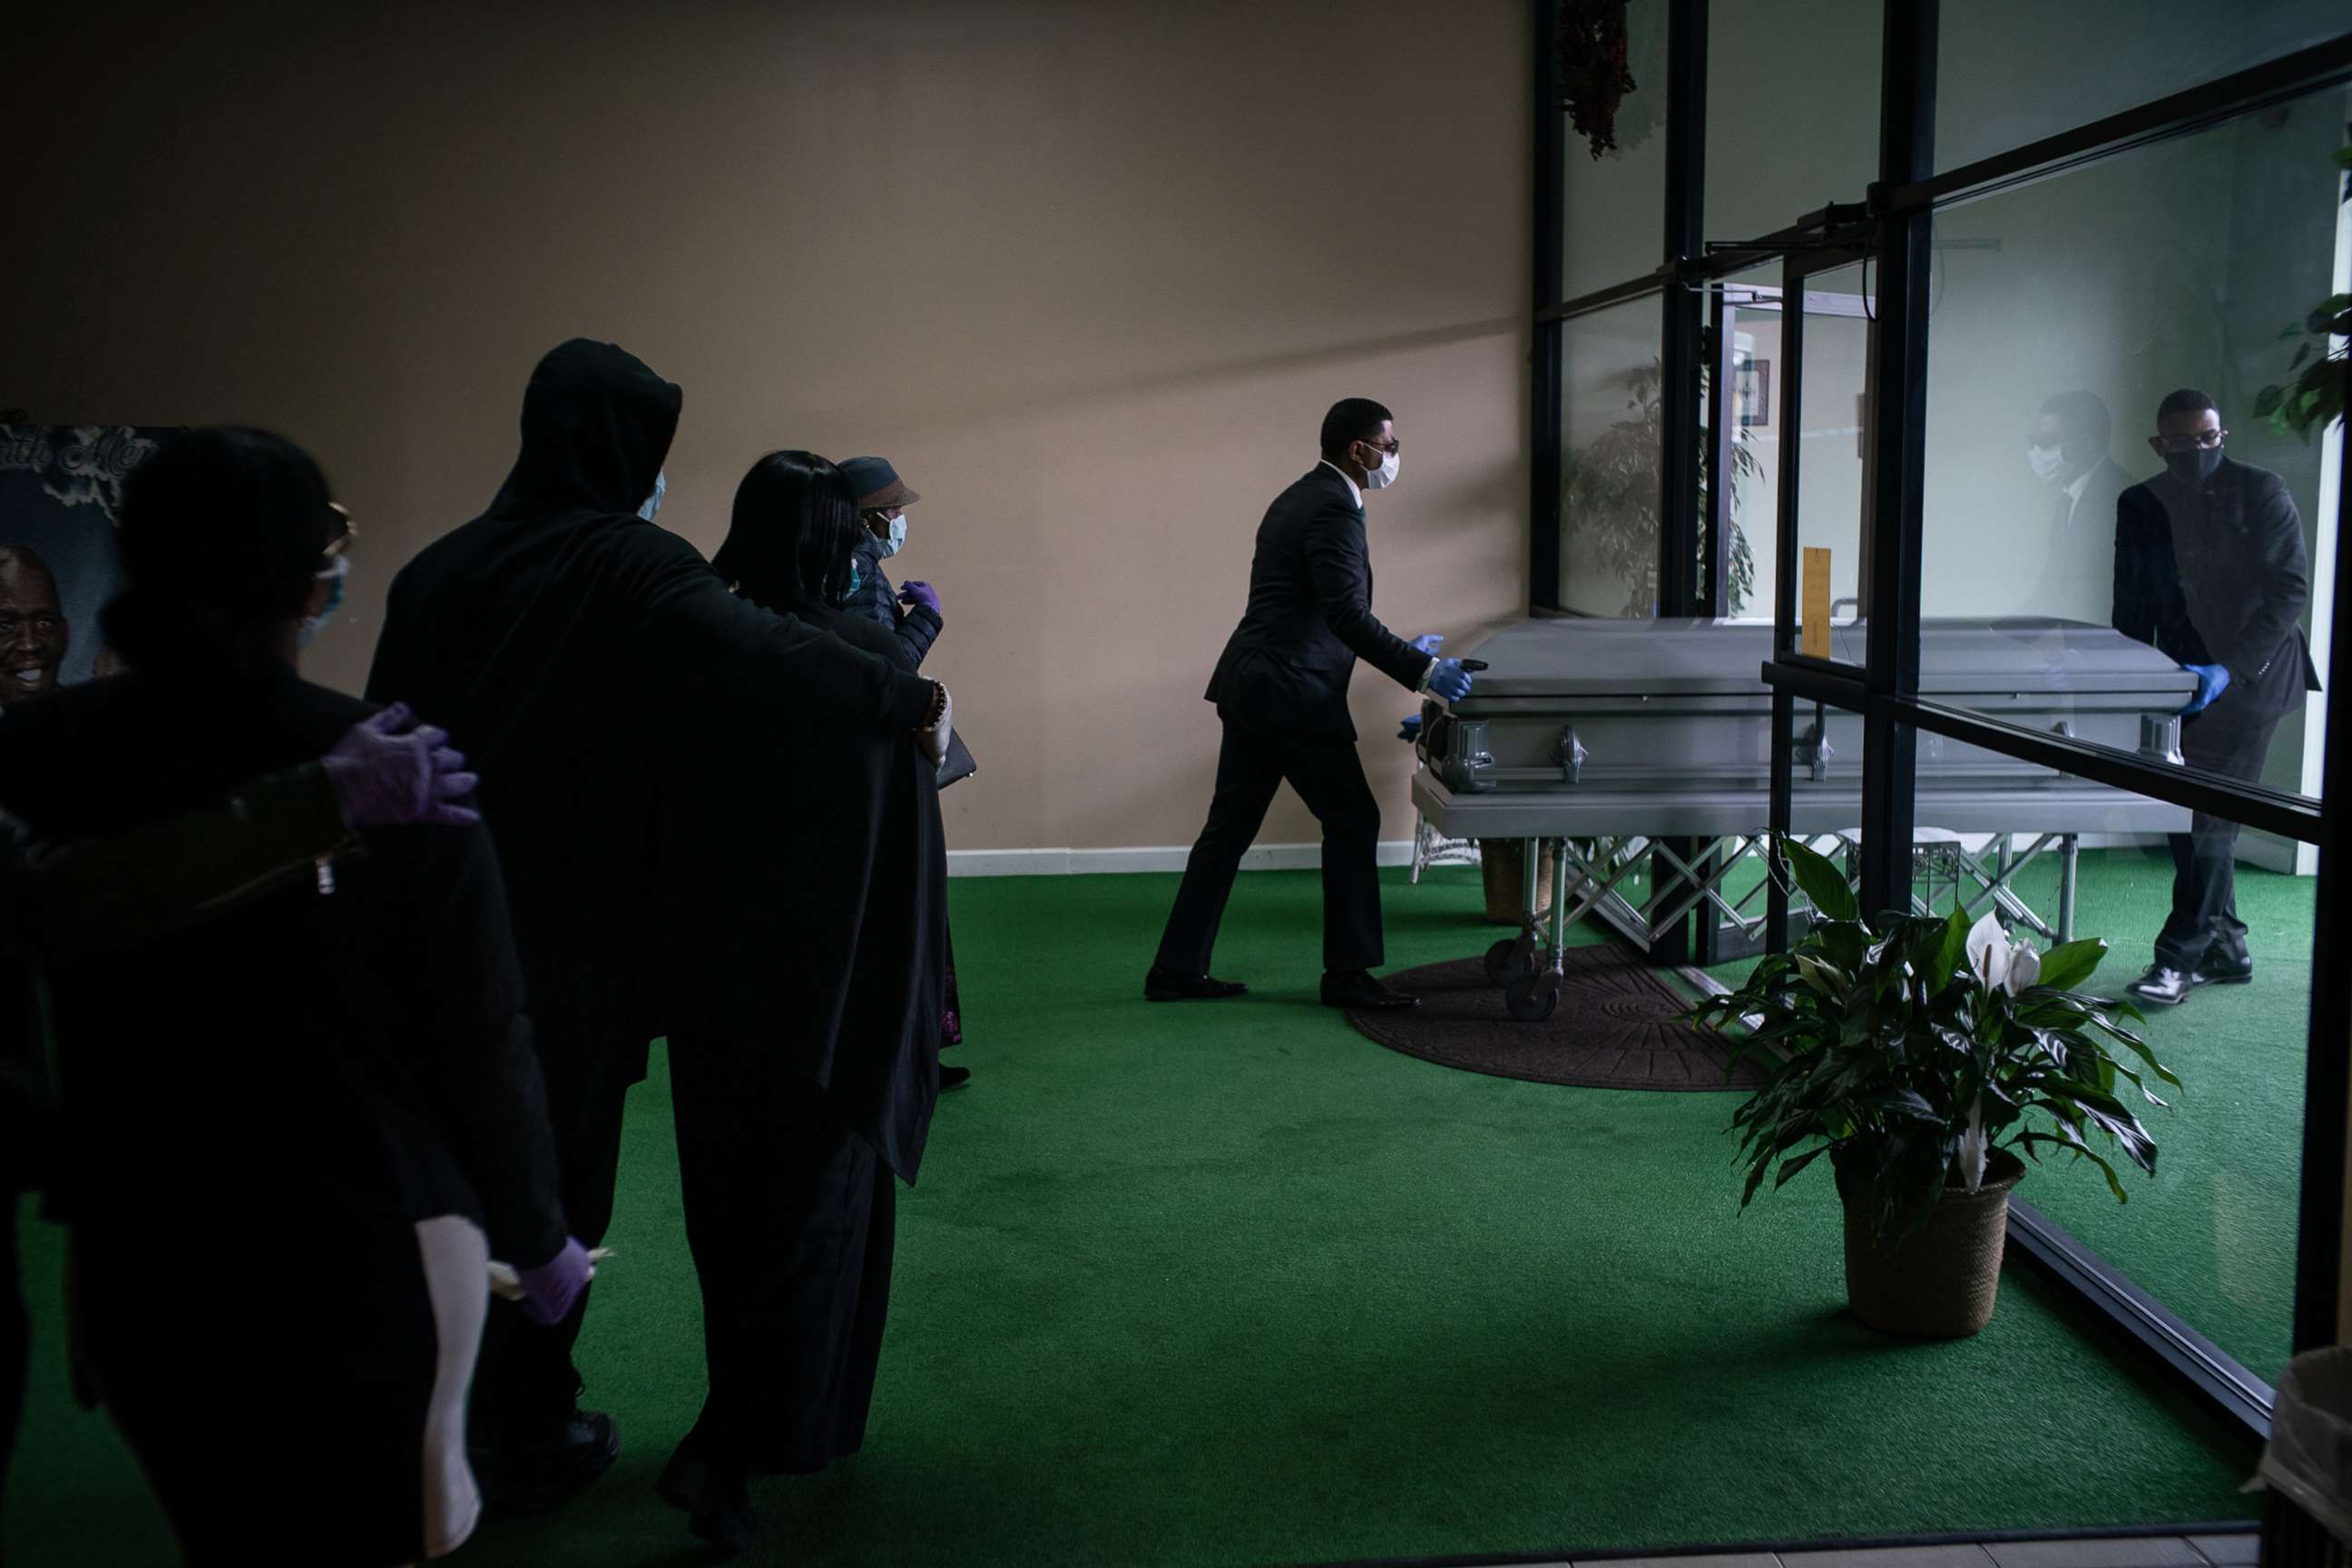 PHOTO: A funeral takes place in Elizabeth, N.J., March 27, 2020.